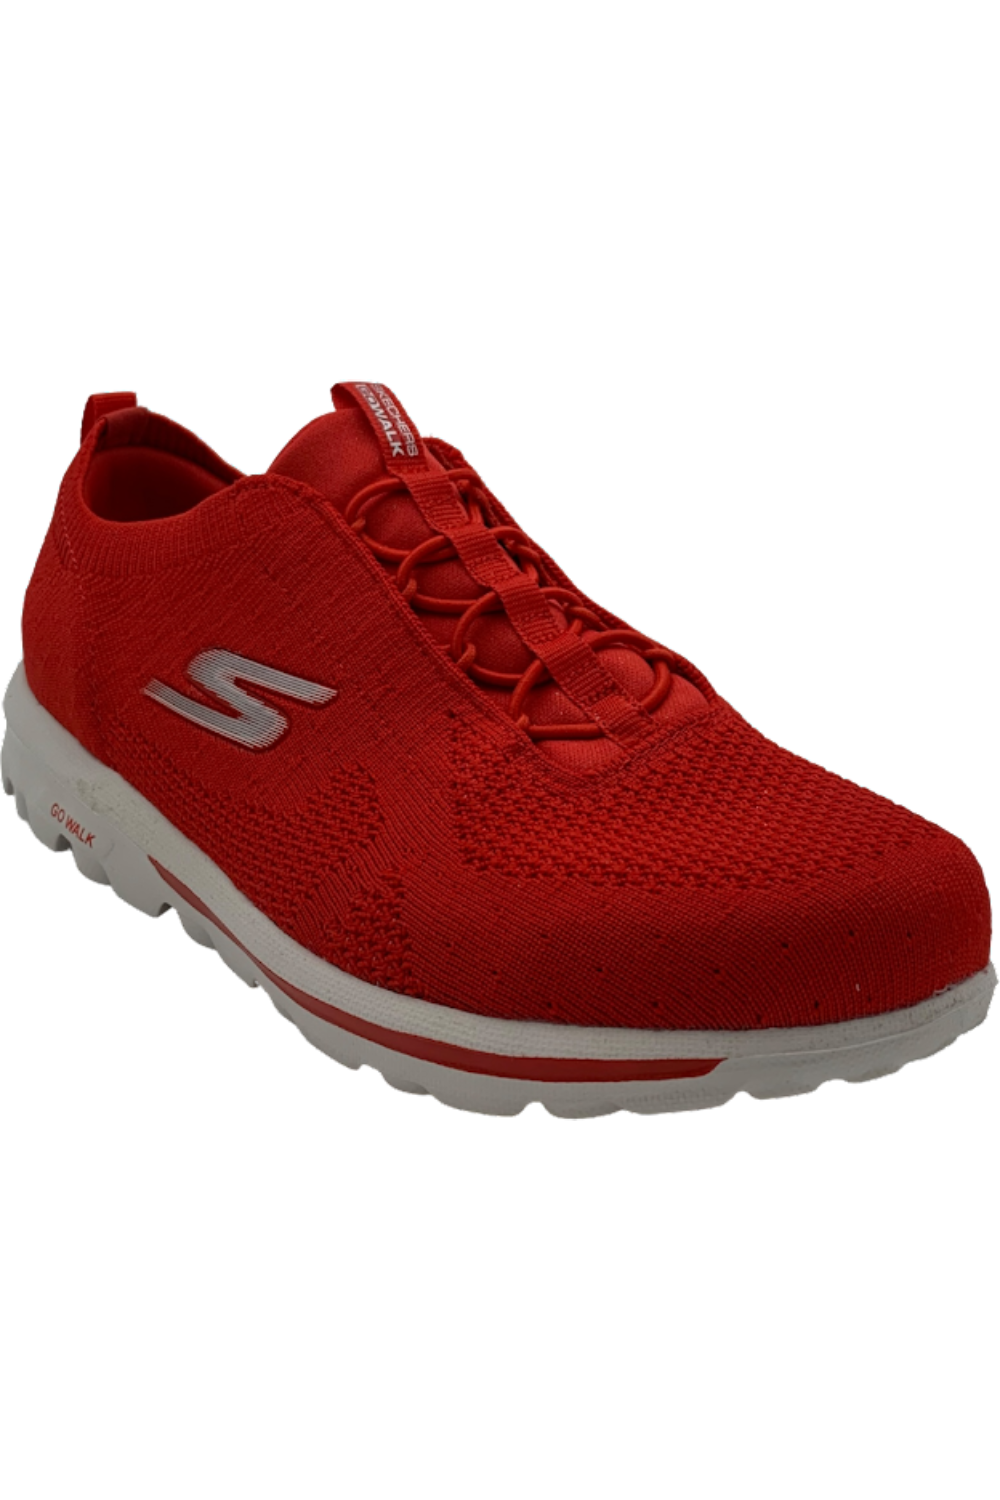 Installere Remission afbrudt Skechers GOwalk Classic Washable Bungee Sneakers Danyl Red | Jender